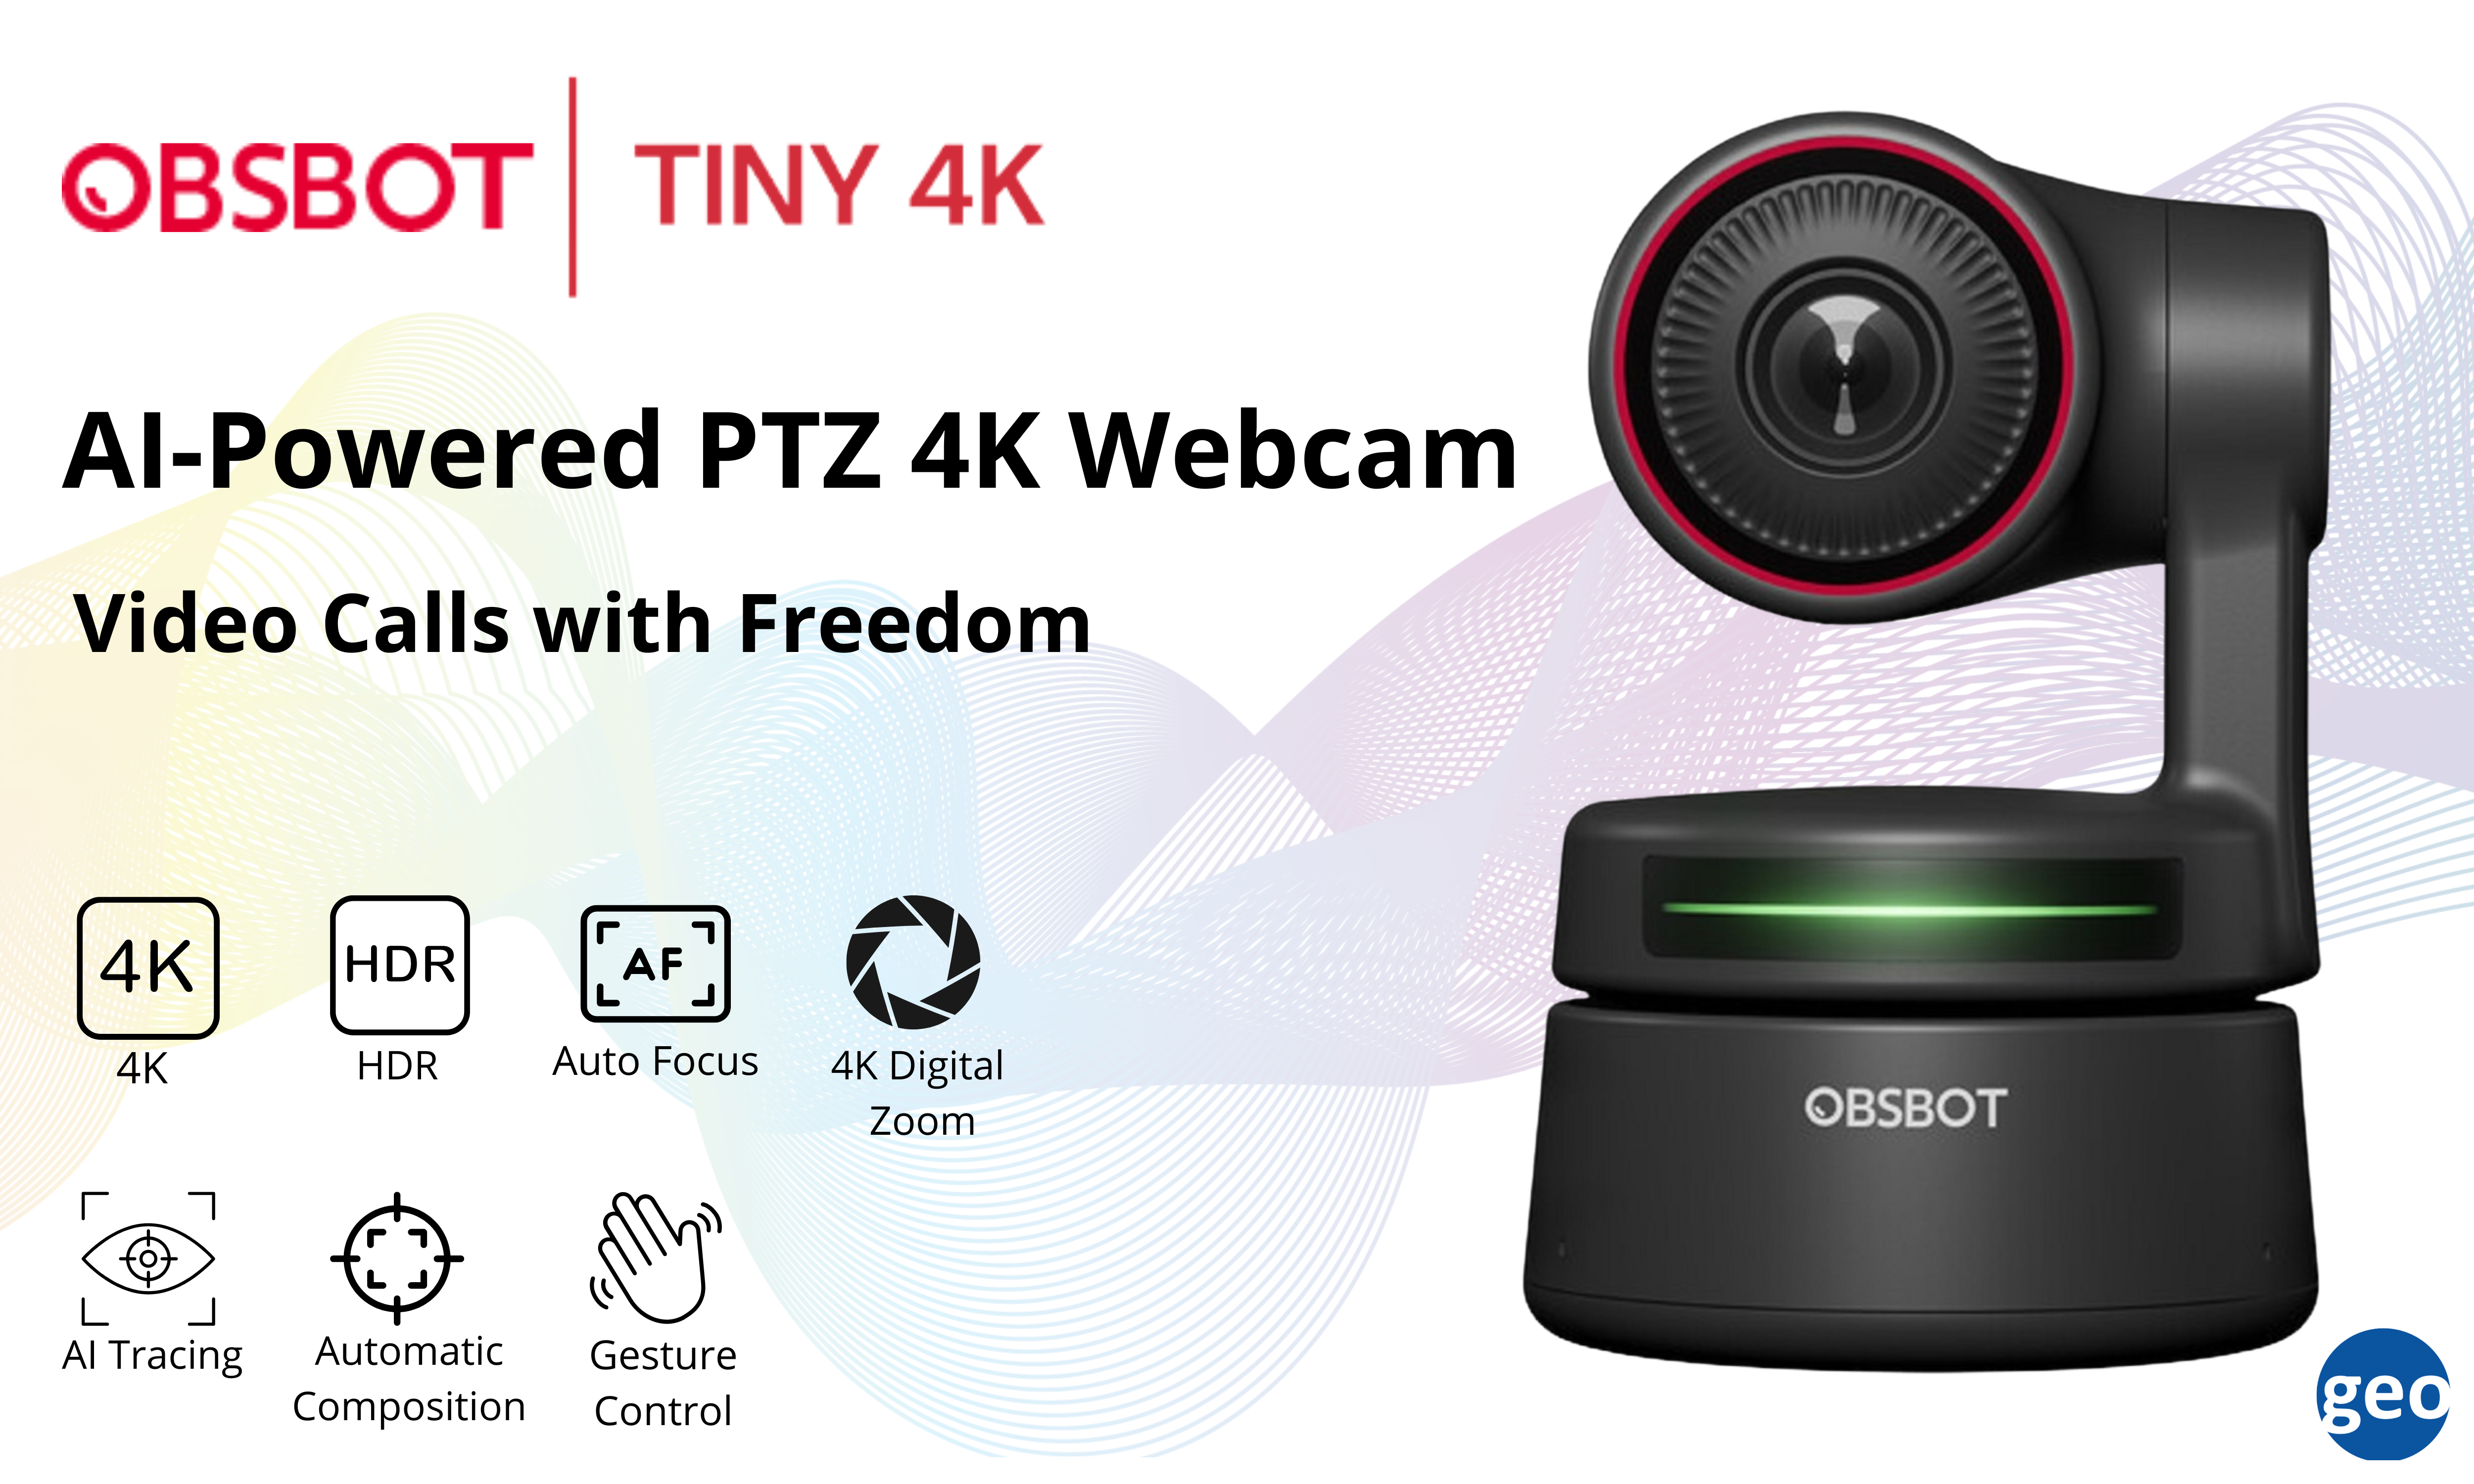 OBSBOT: AI-Powered PTZ 4K WebCam offers a Powerful and Intelligent webcam for Remote classes, Live streaming, Video conferencing, and more.